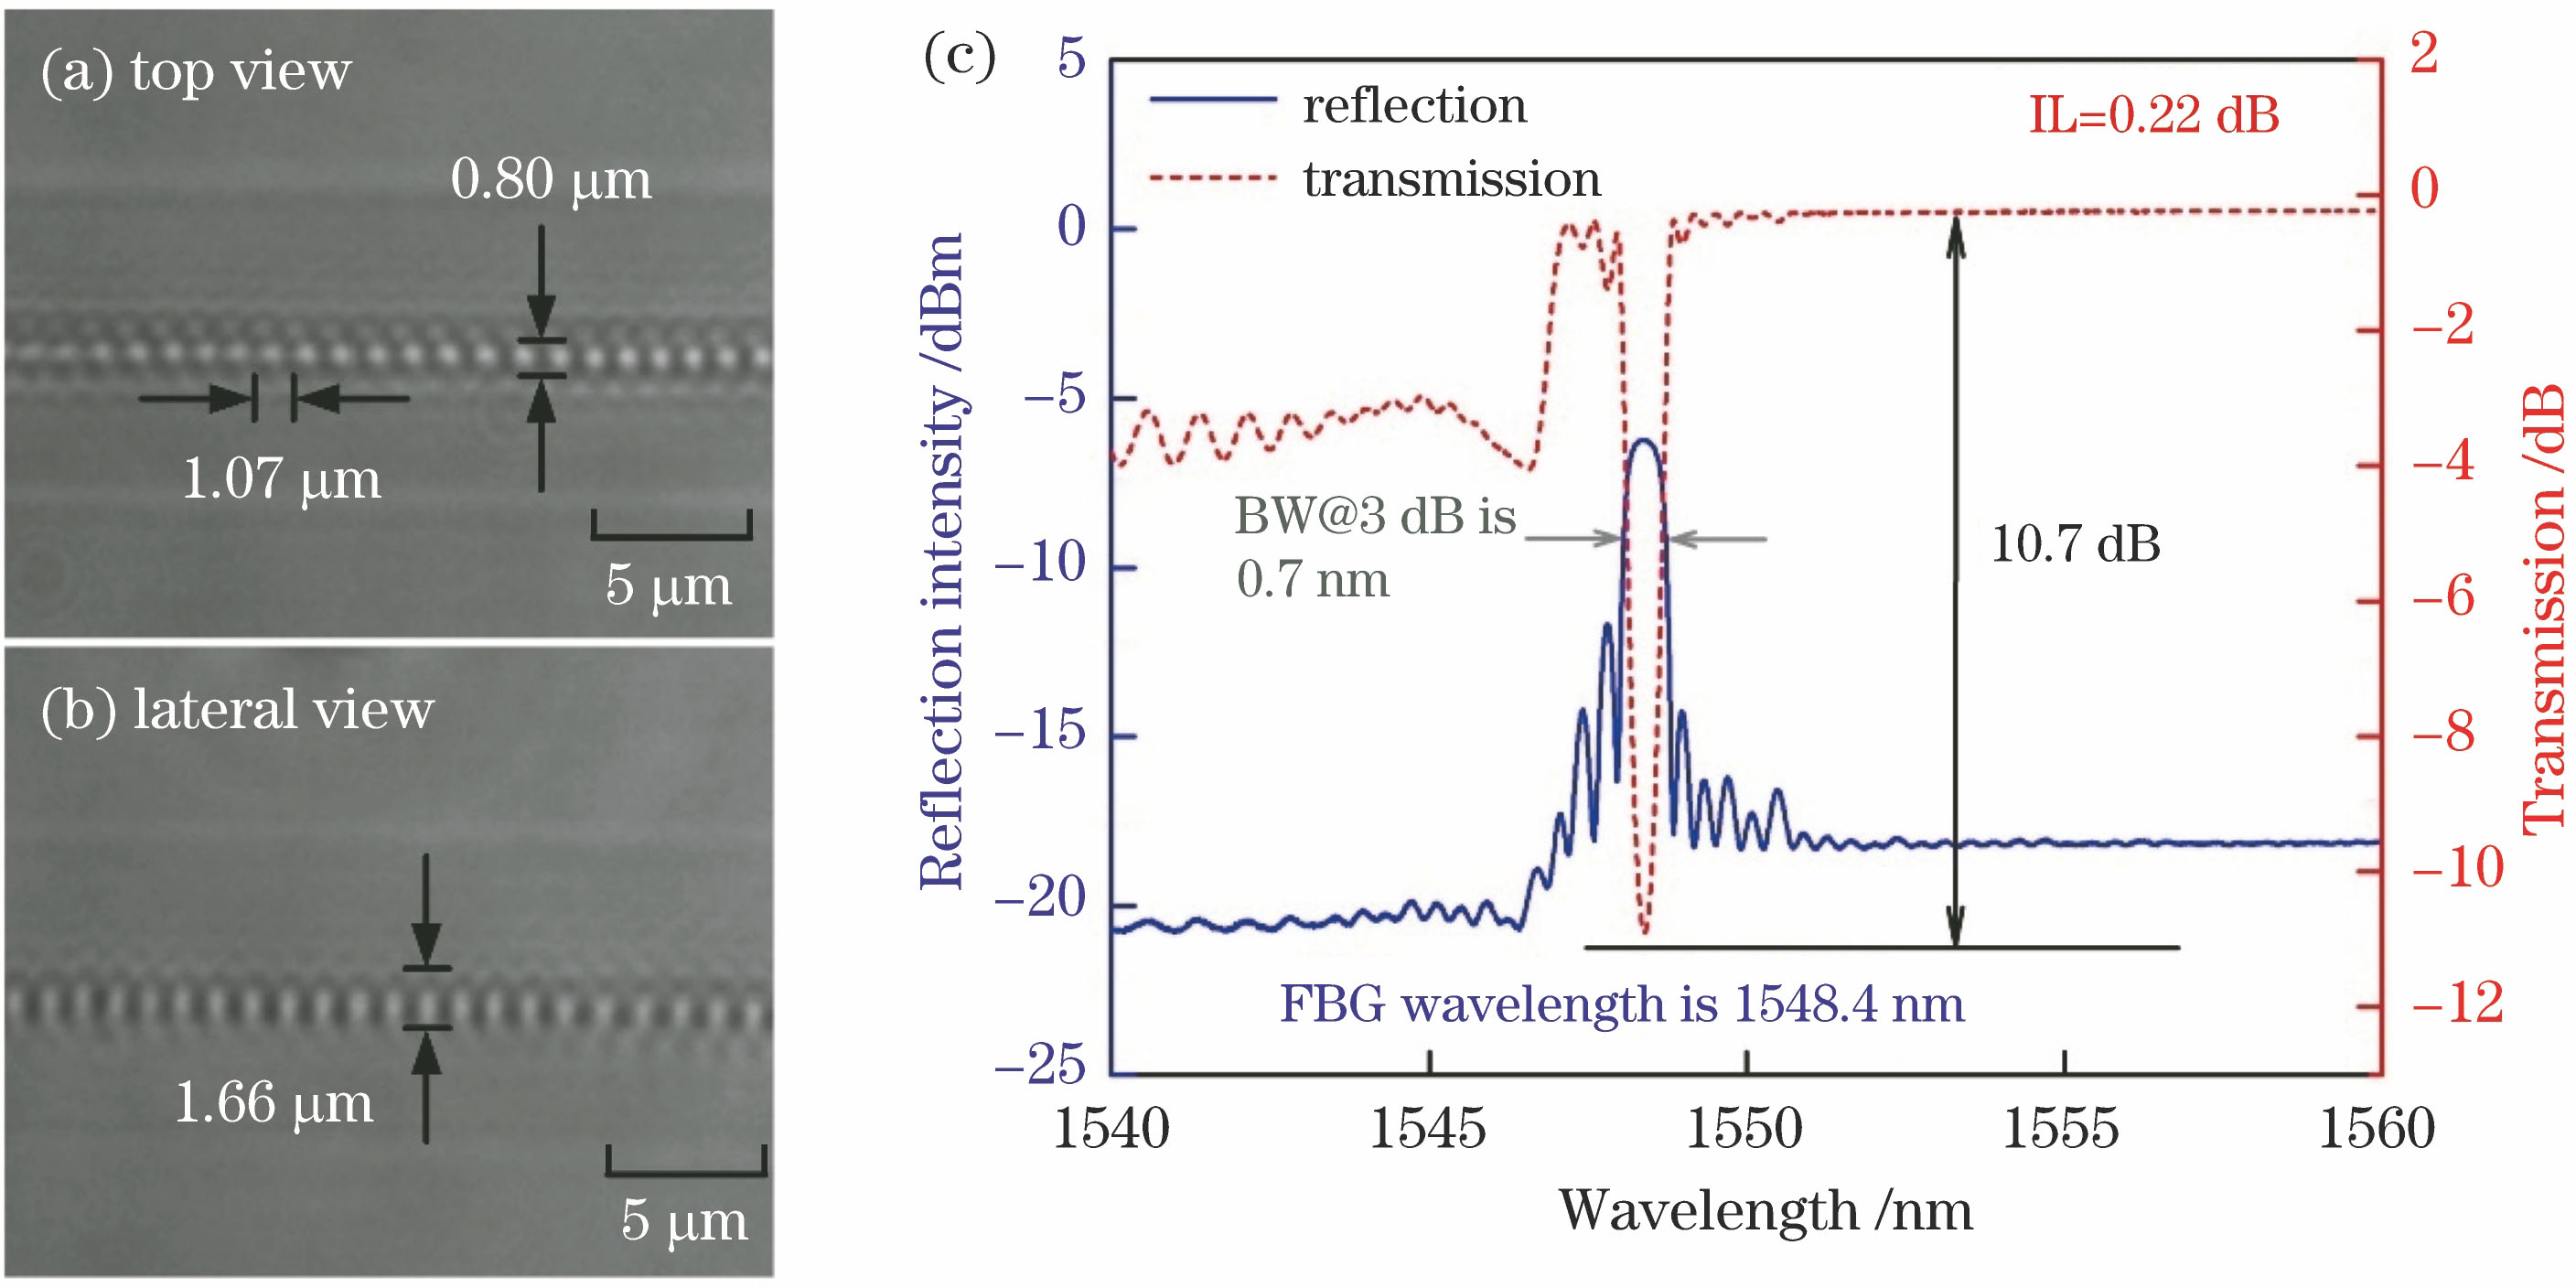 Microscope images and spectra of the FBG. (a) Top view; (b) lateral view; (c) transmission spectrum and reflection spectrum